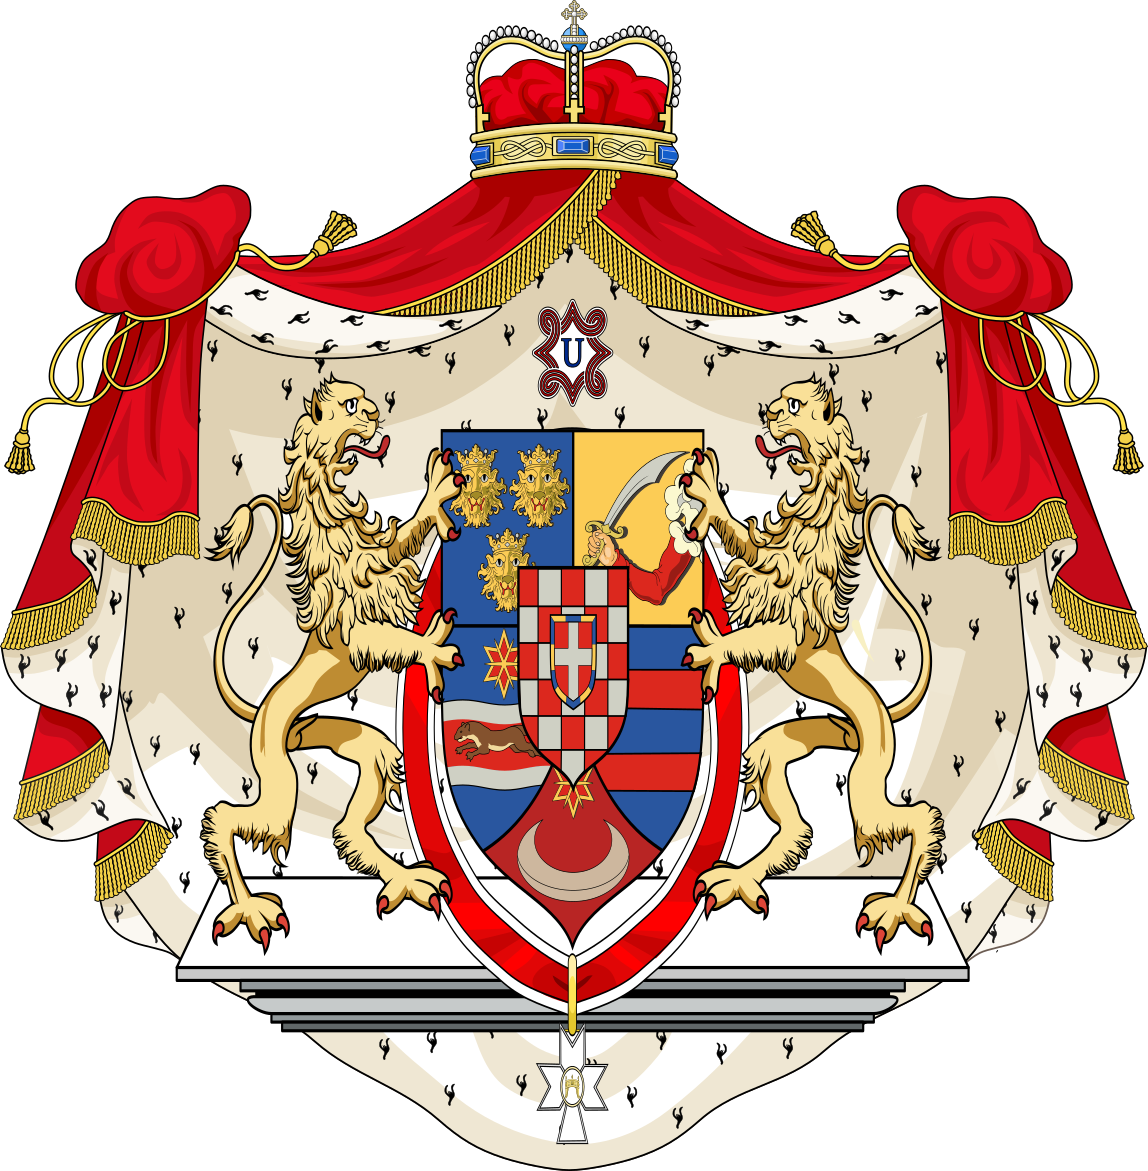 Coat of Arms of the Independent State of Croatia